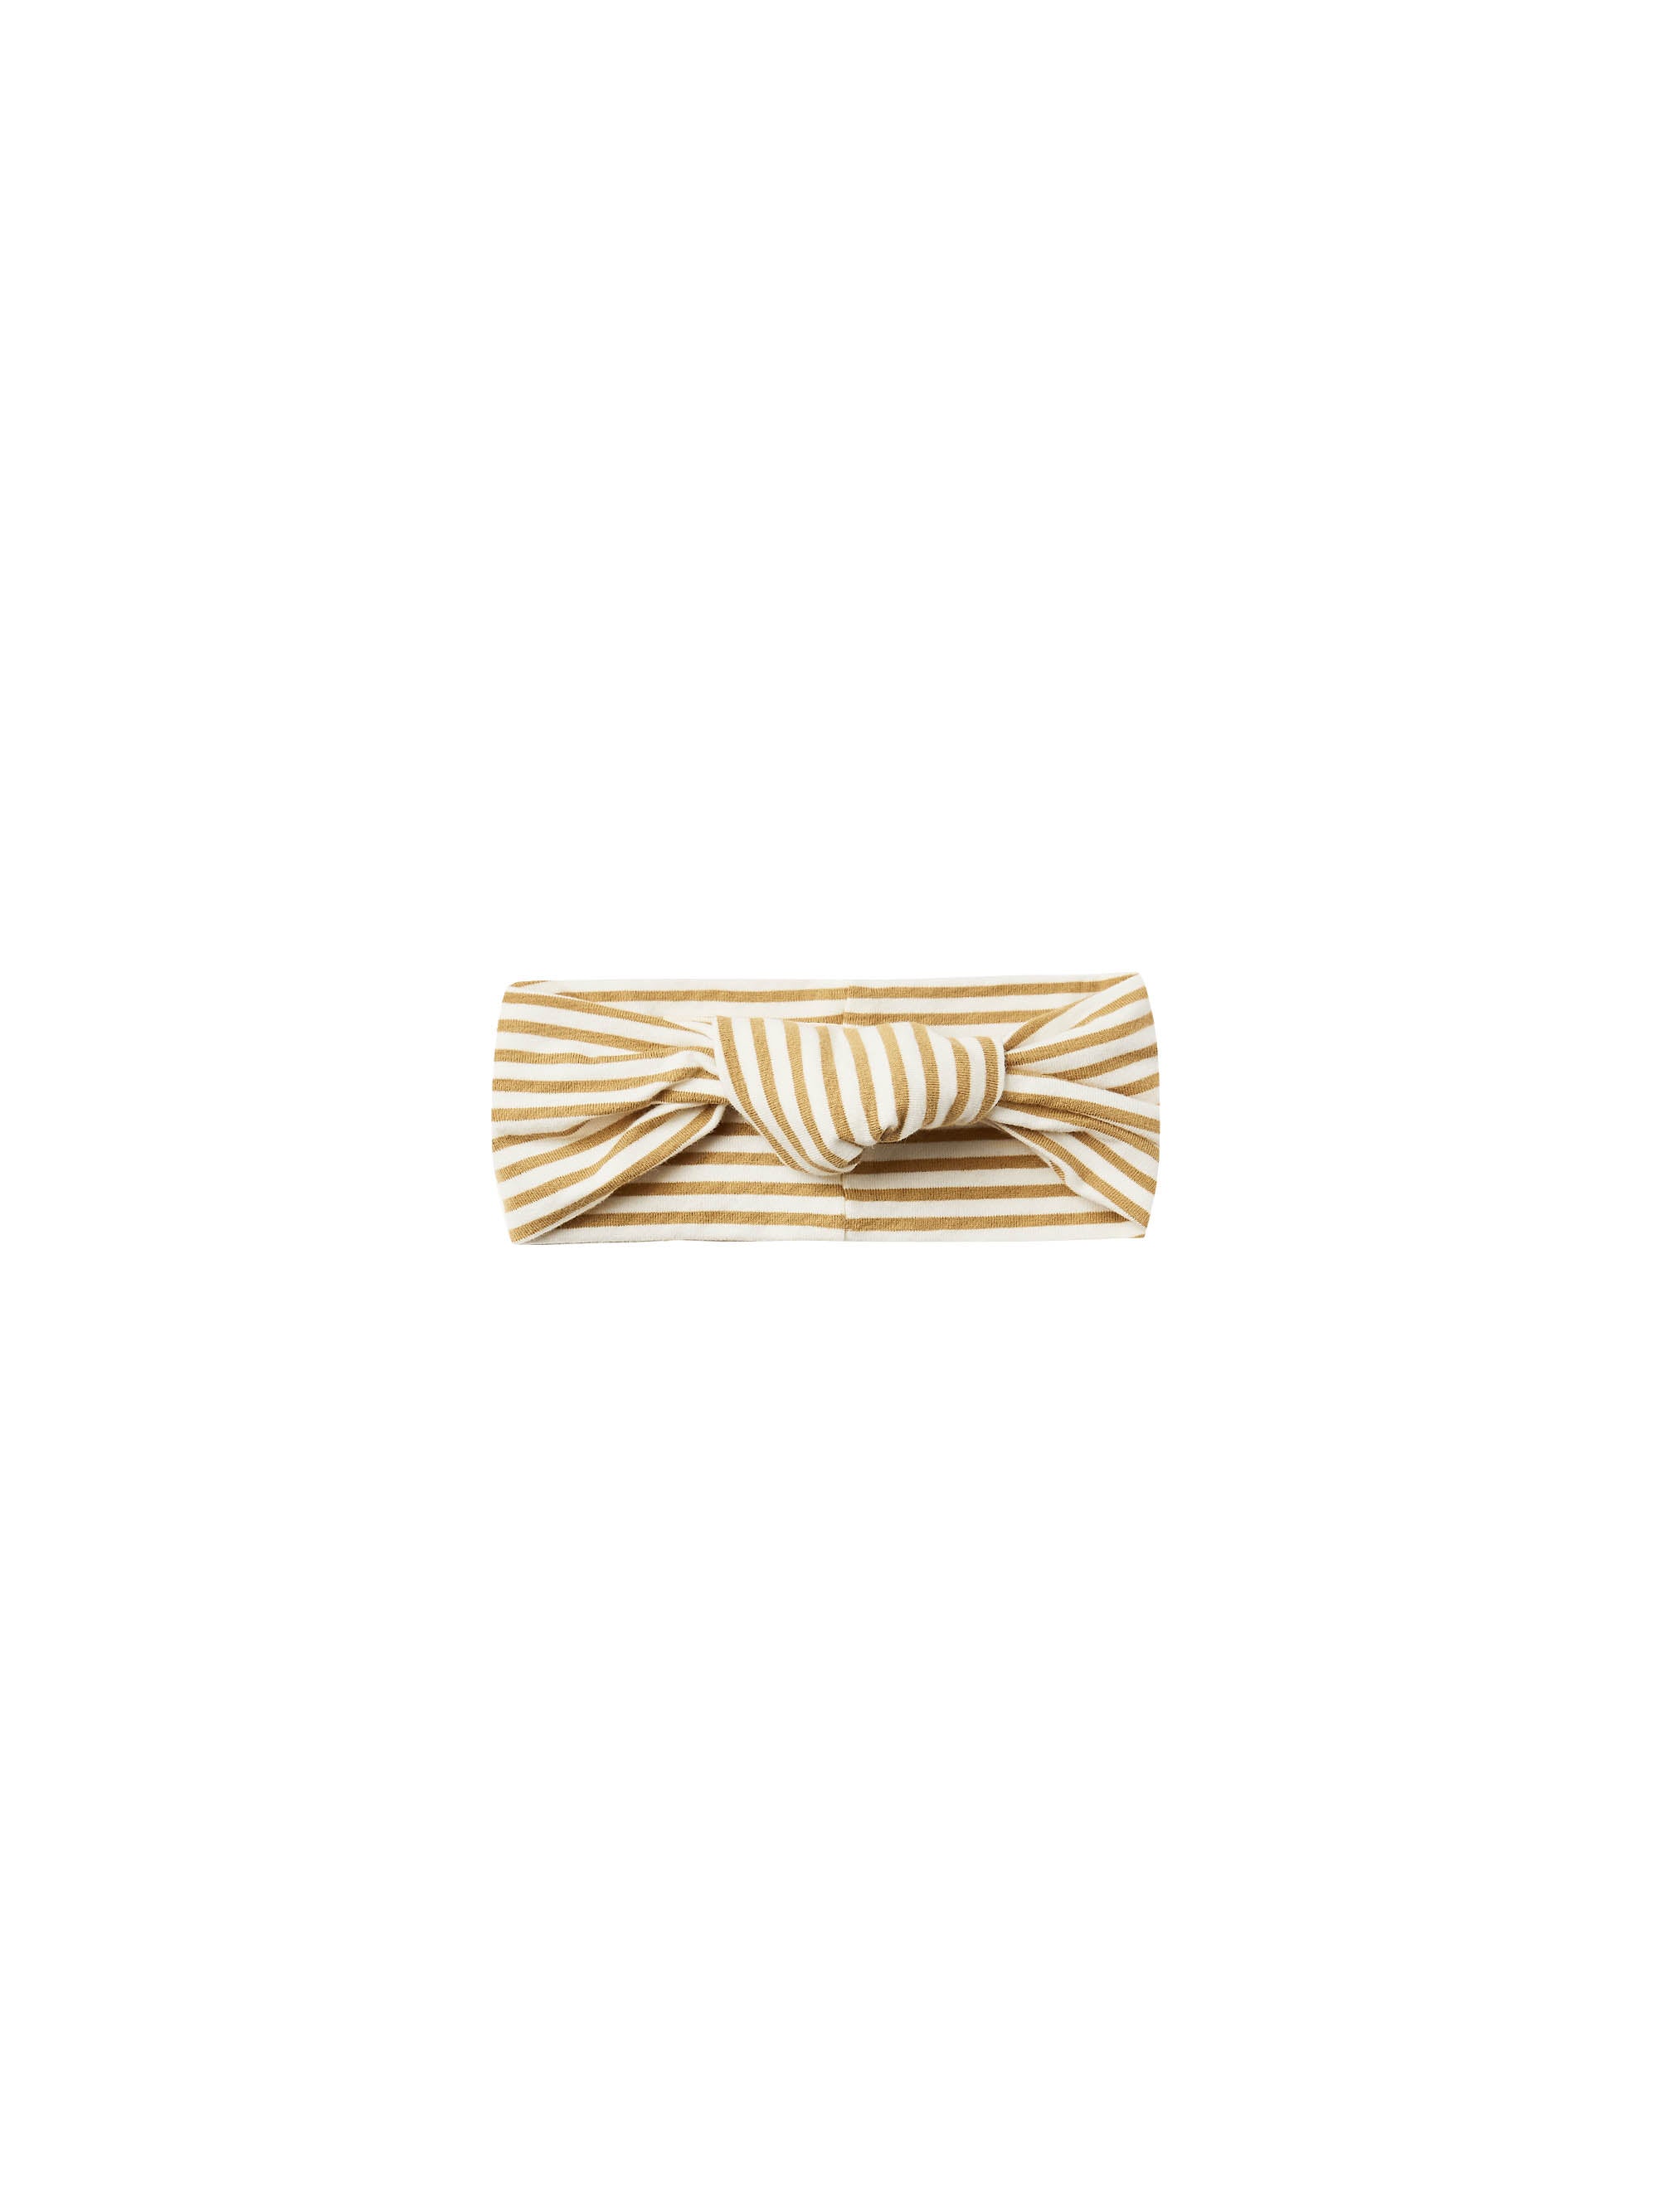 QUINCY MAE KNOTTED HEADBAND / GOLD STRIPE